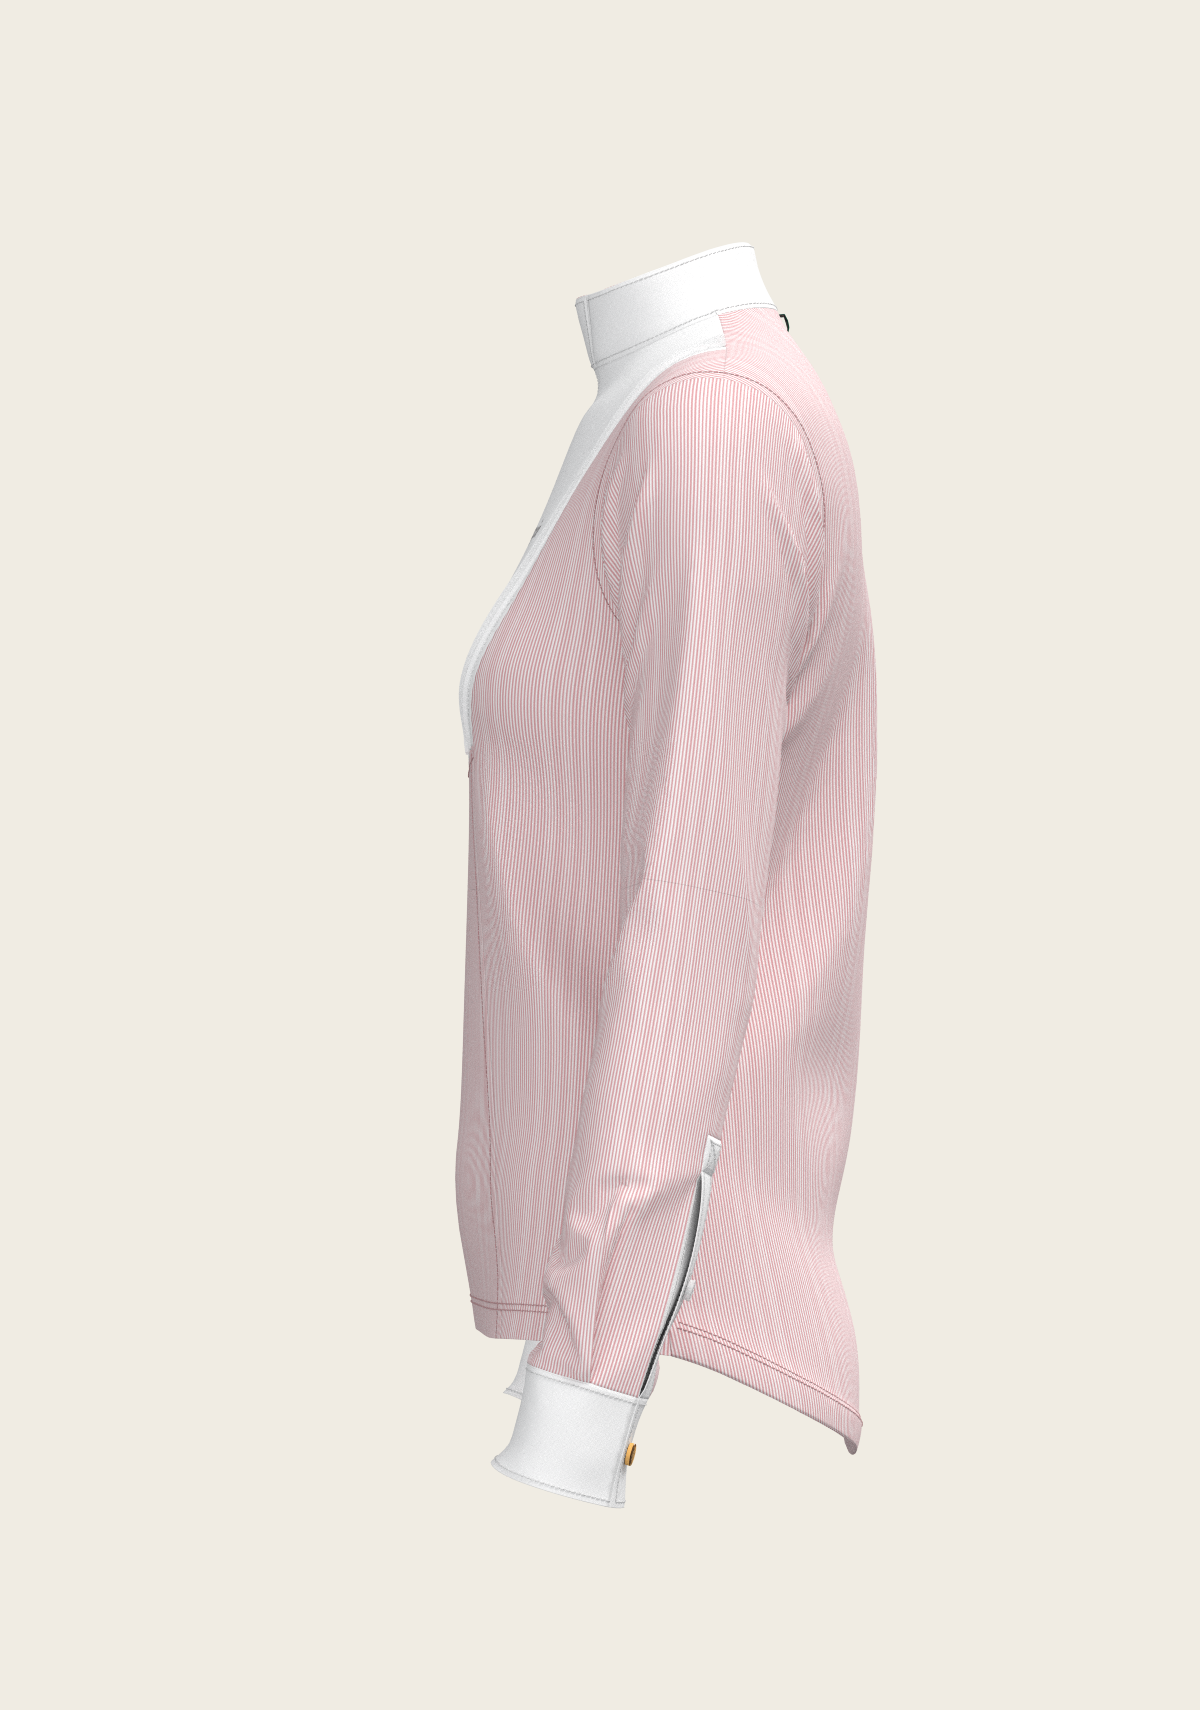  Stripes in Rose Short Pleated Long Sleeve Show Shirt